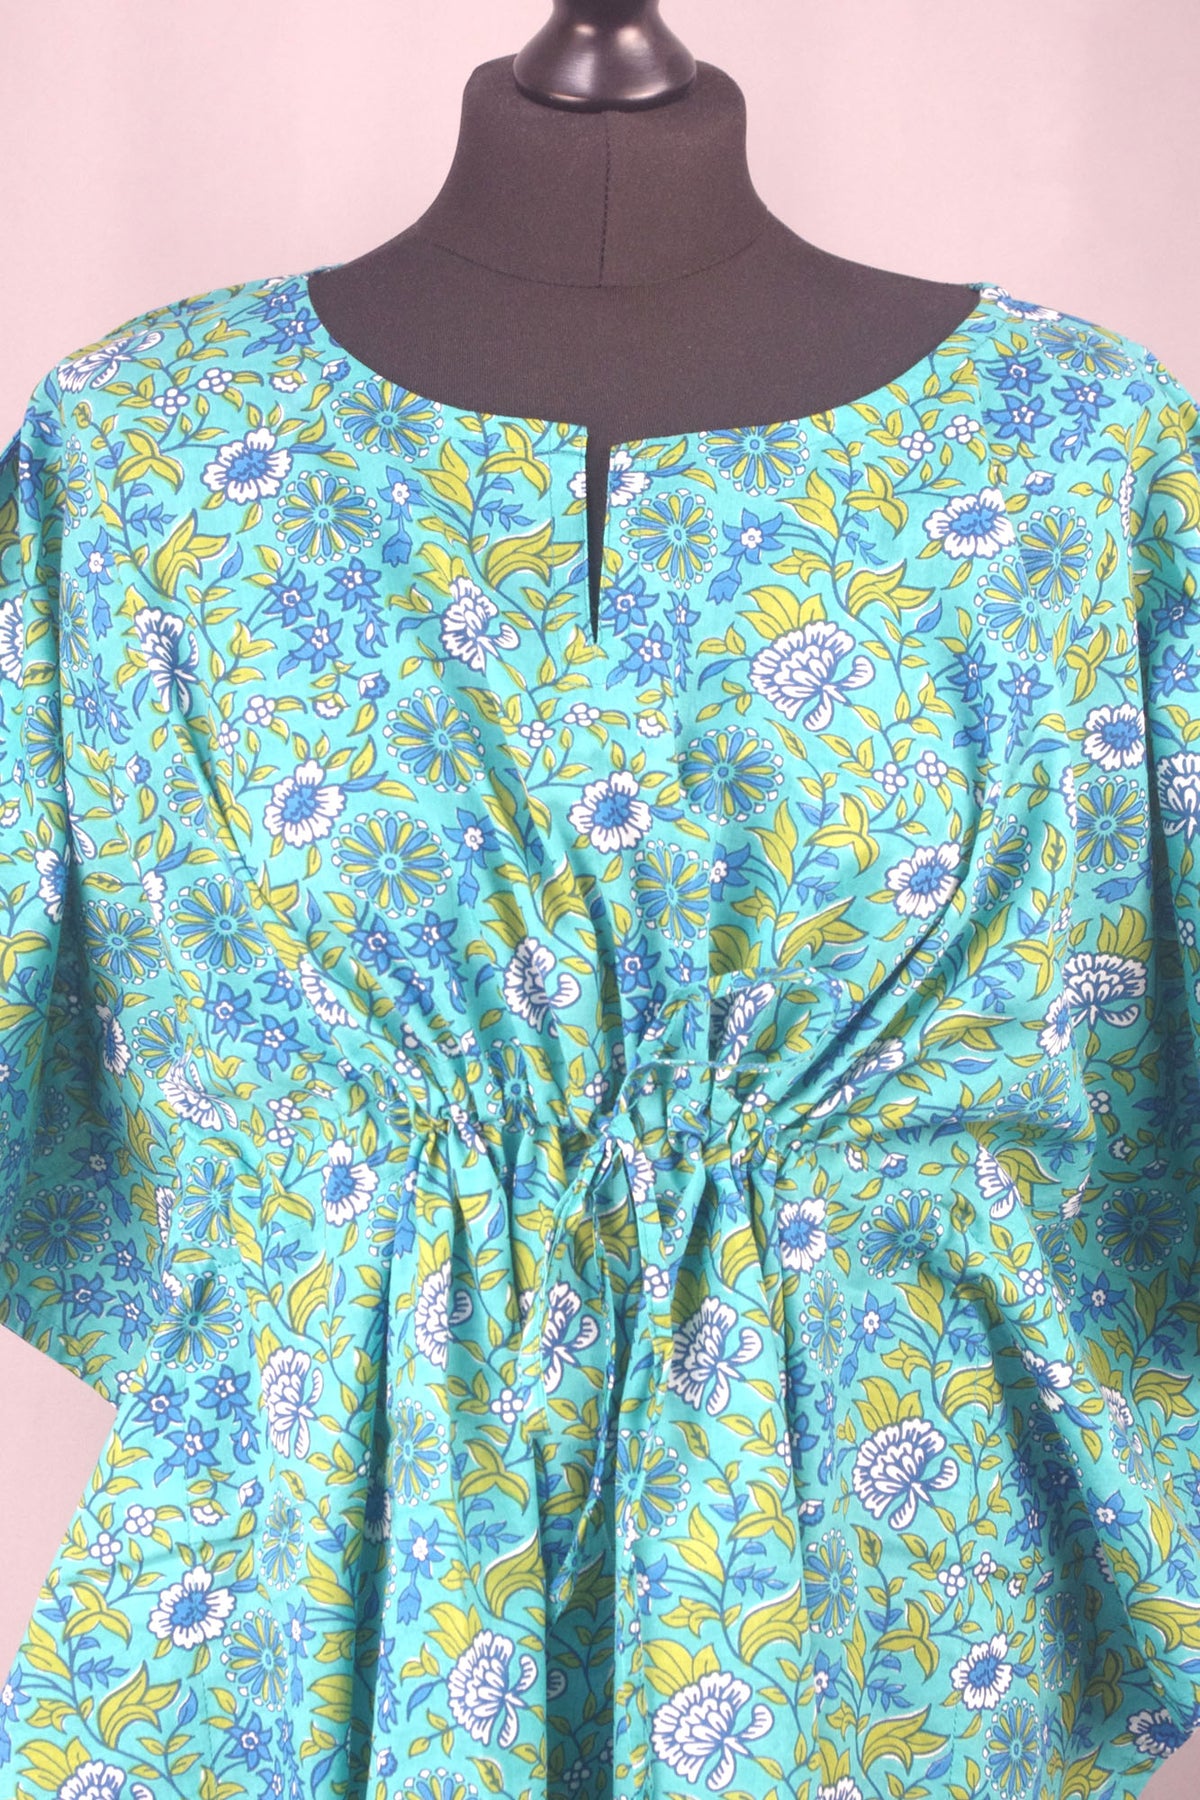 Block Printed Cotton Coverup / Kaftans - Teal Floral